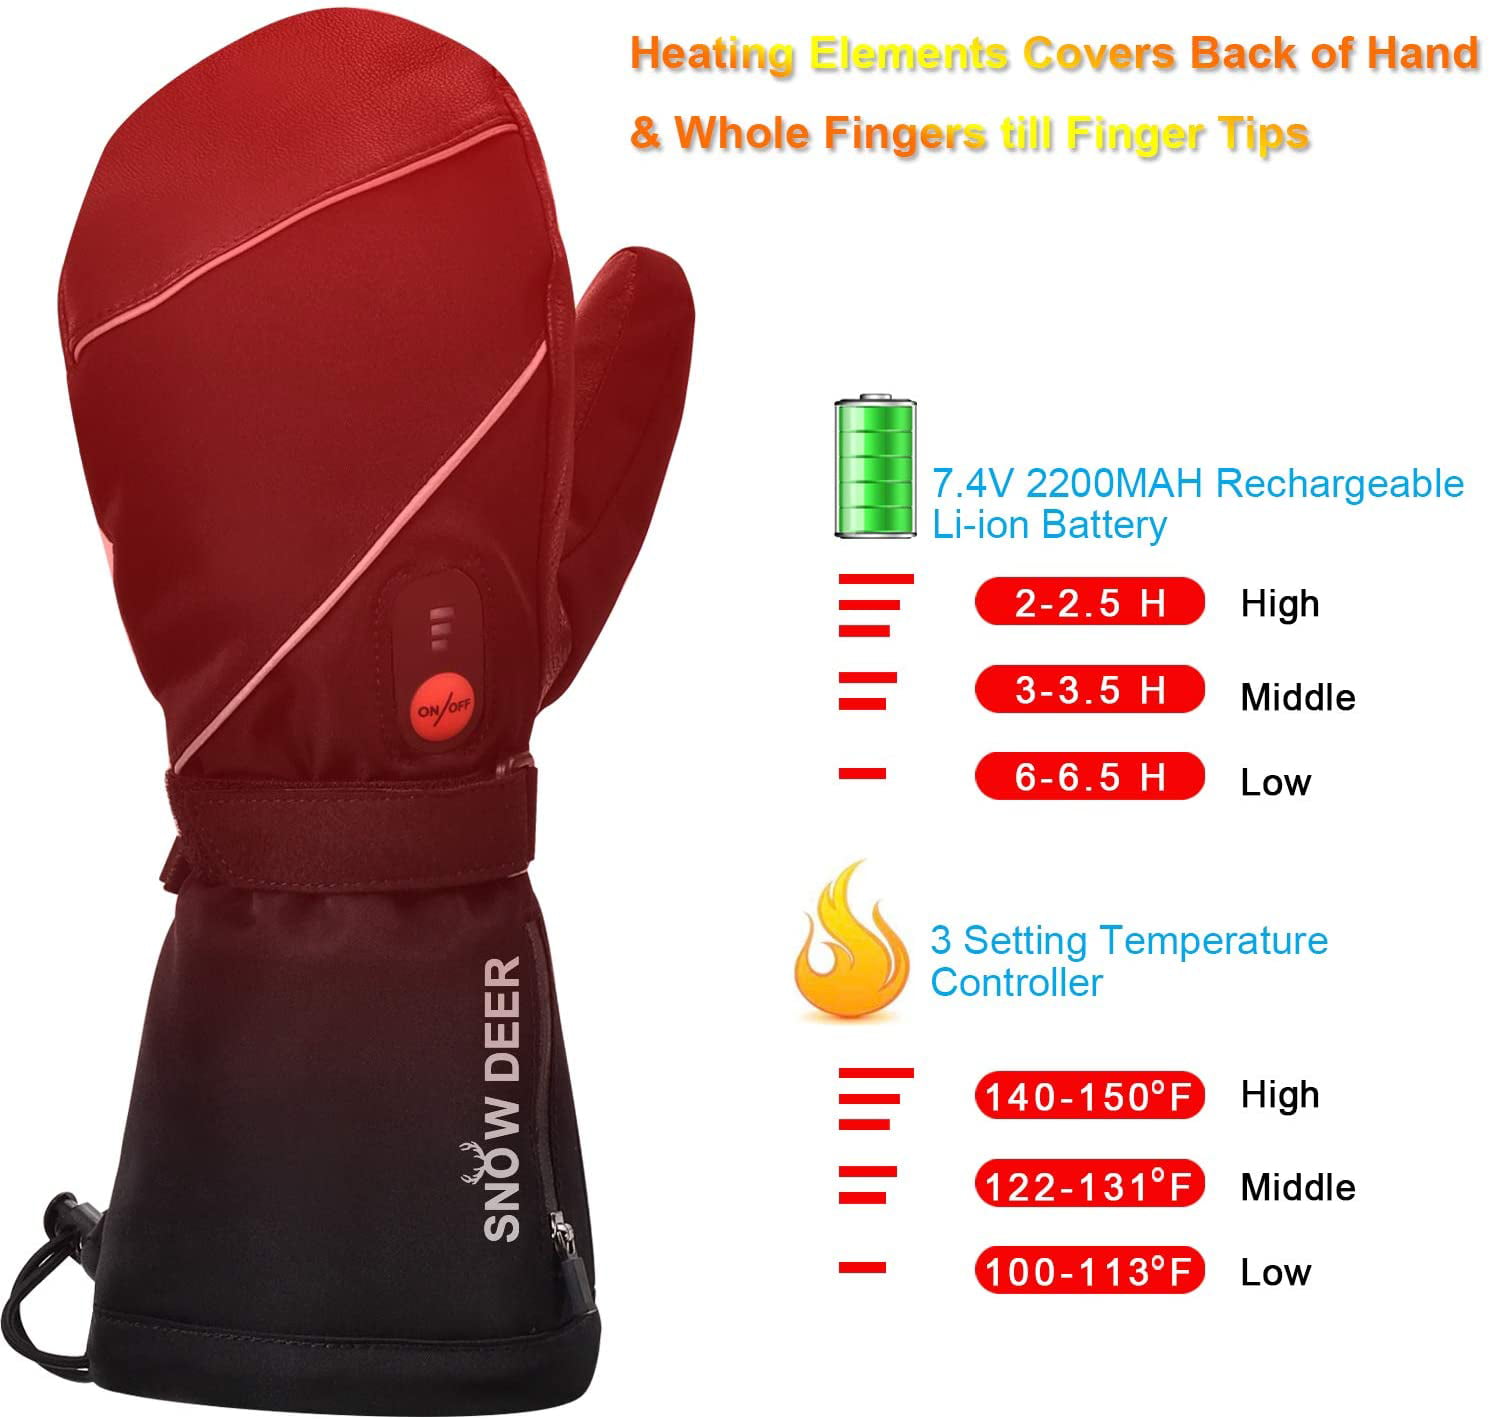 Heated Gloves,Mens Womens Heated Ski Gloves Mittens,7.4V 2200MAH Electric Rechargeable Battery Gloves for Winter Skiing Skating Snow Camping Hiking Heated Arthritis Hand Warmer Gloves